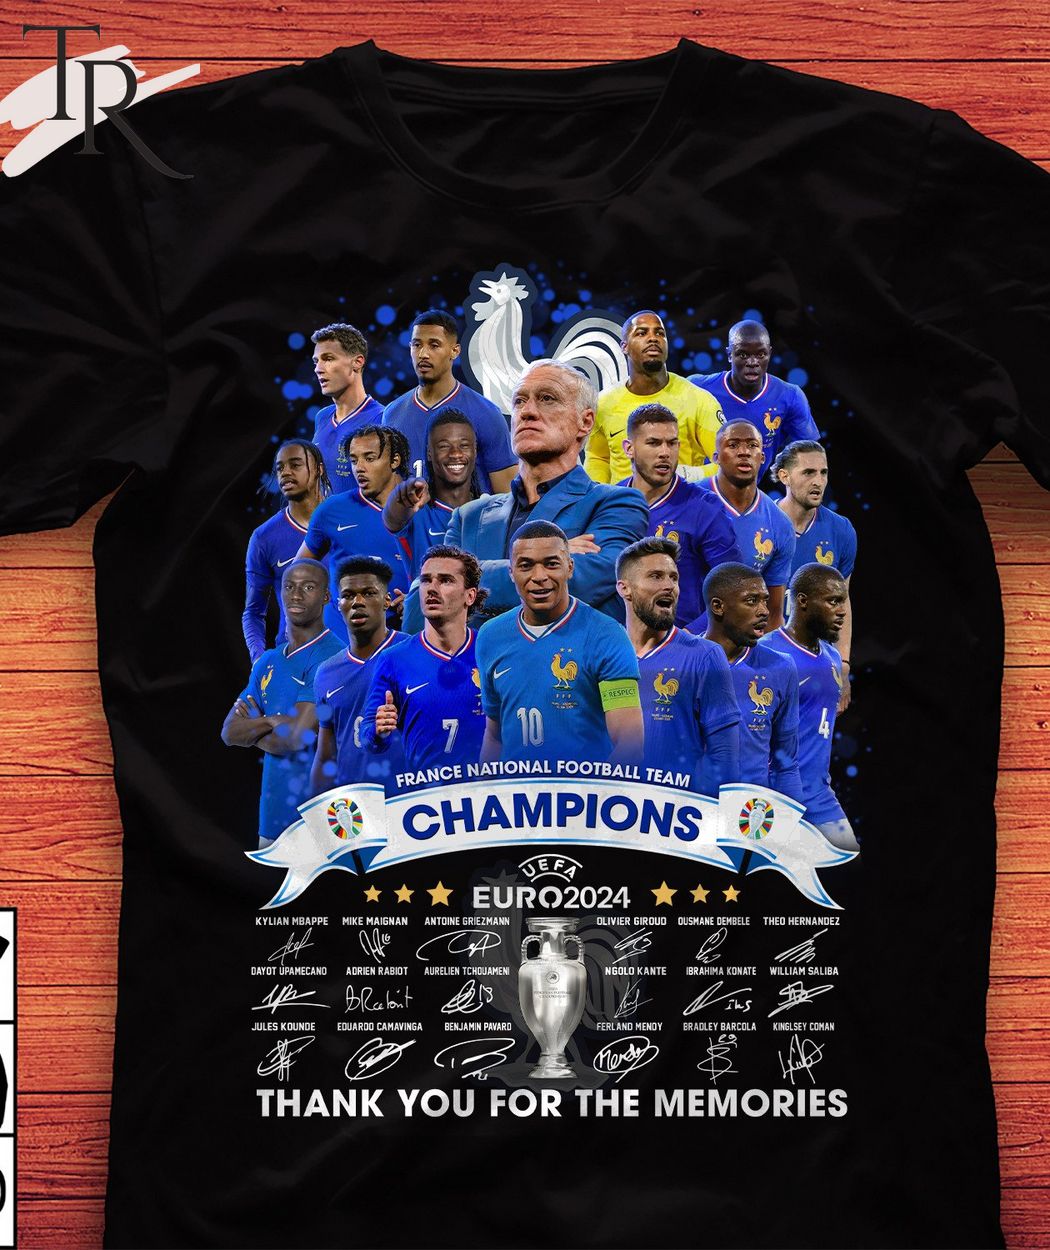 France National Football Team Champions UEFA Euro 2024 Thank You For The Memories T-Shirt